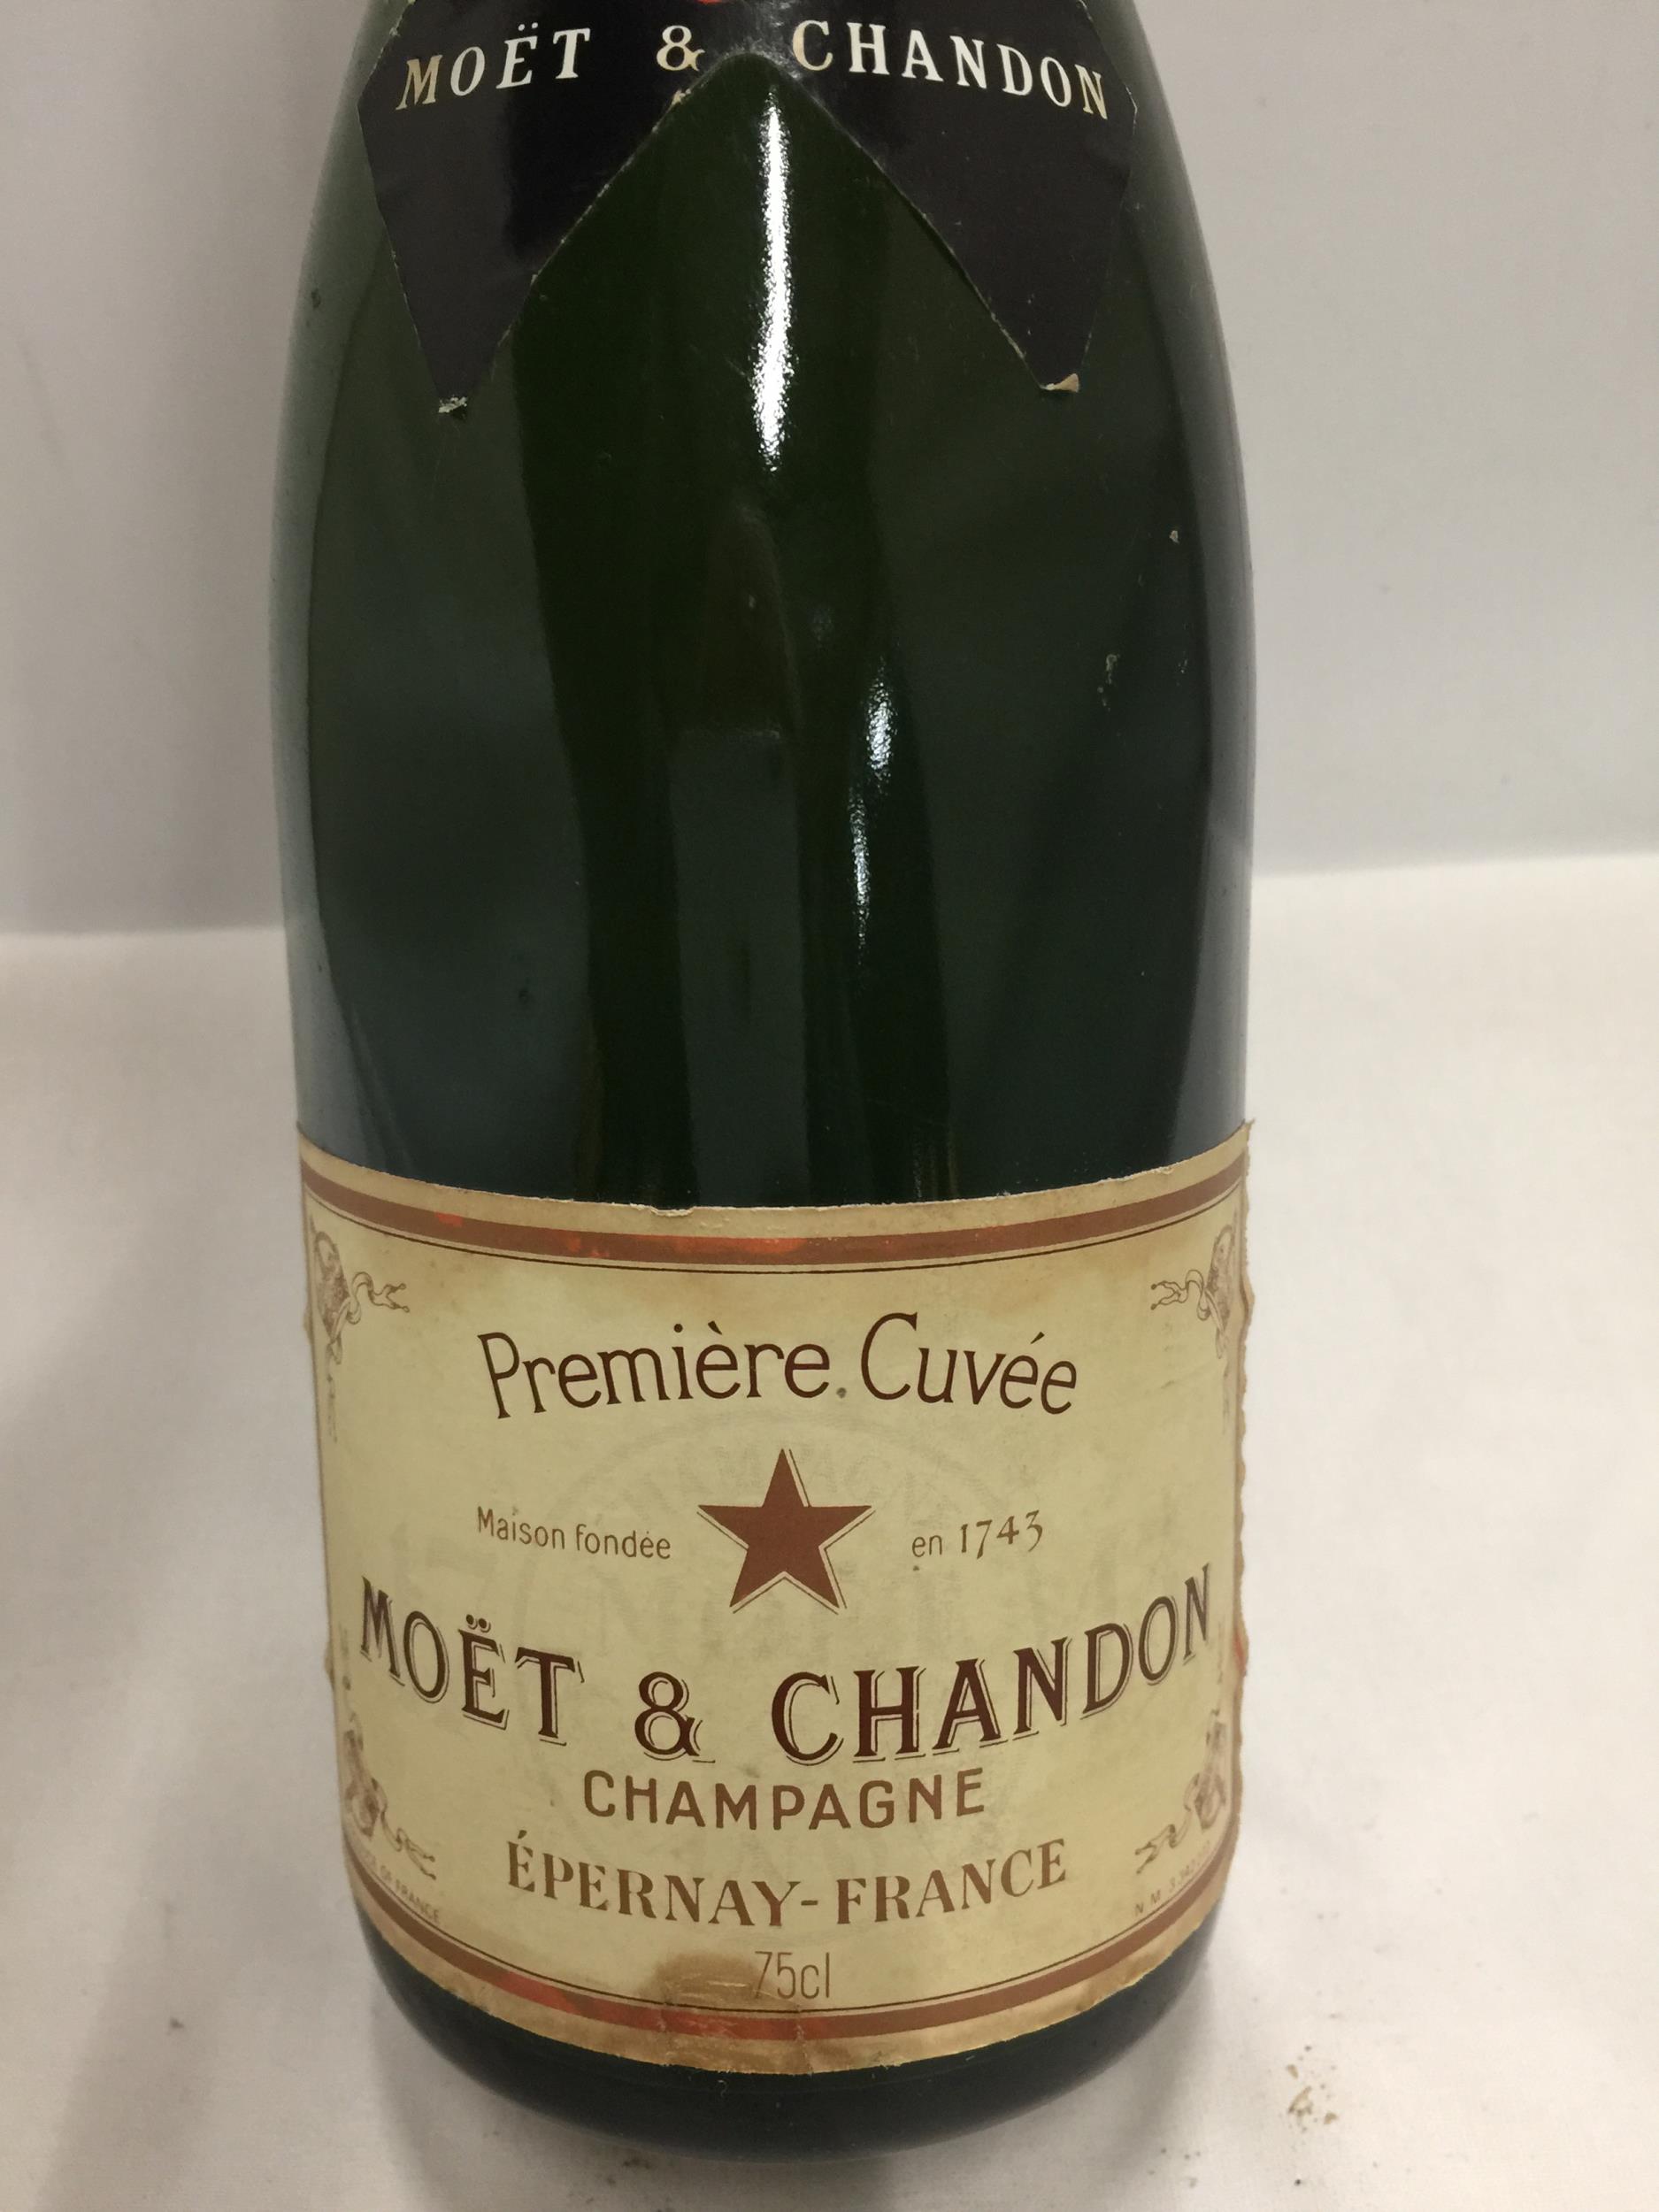 A 75CL BOTTLE - MOET AND CHANDON PREMIERE CUVEE CHAMPAGNE - Image 2 of 2